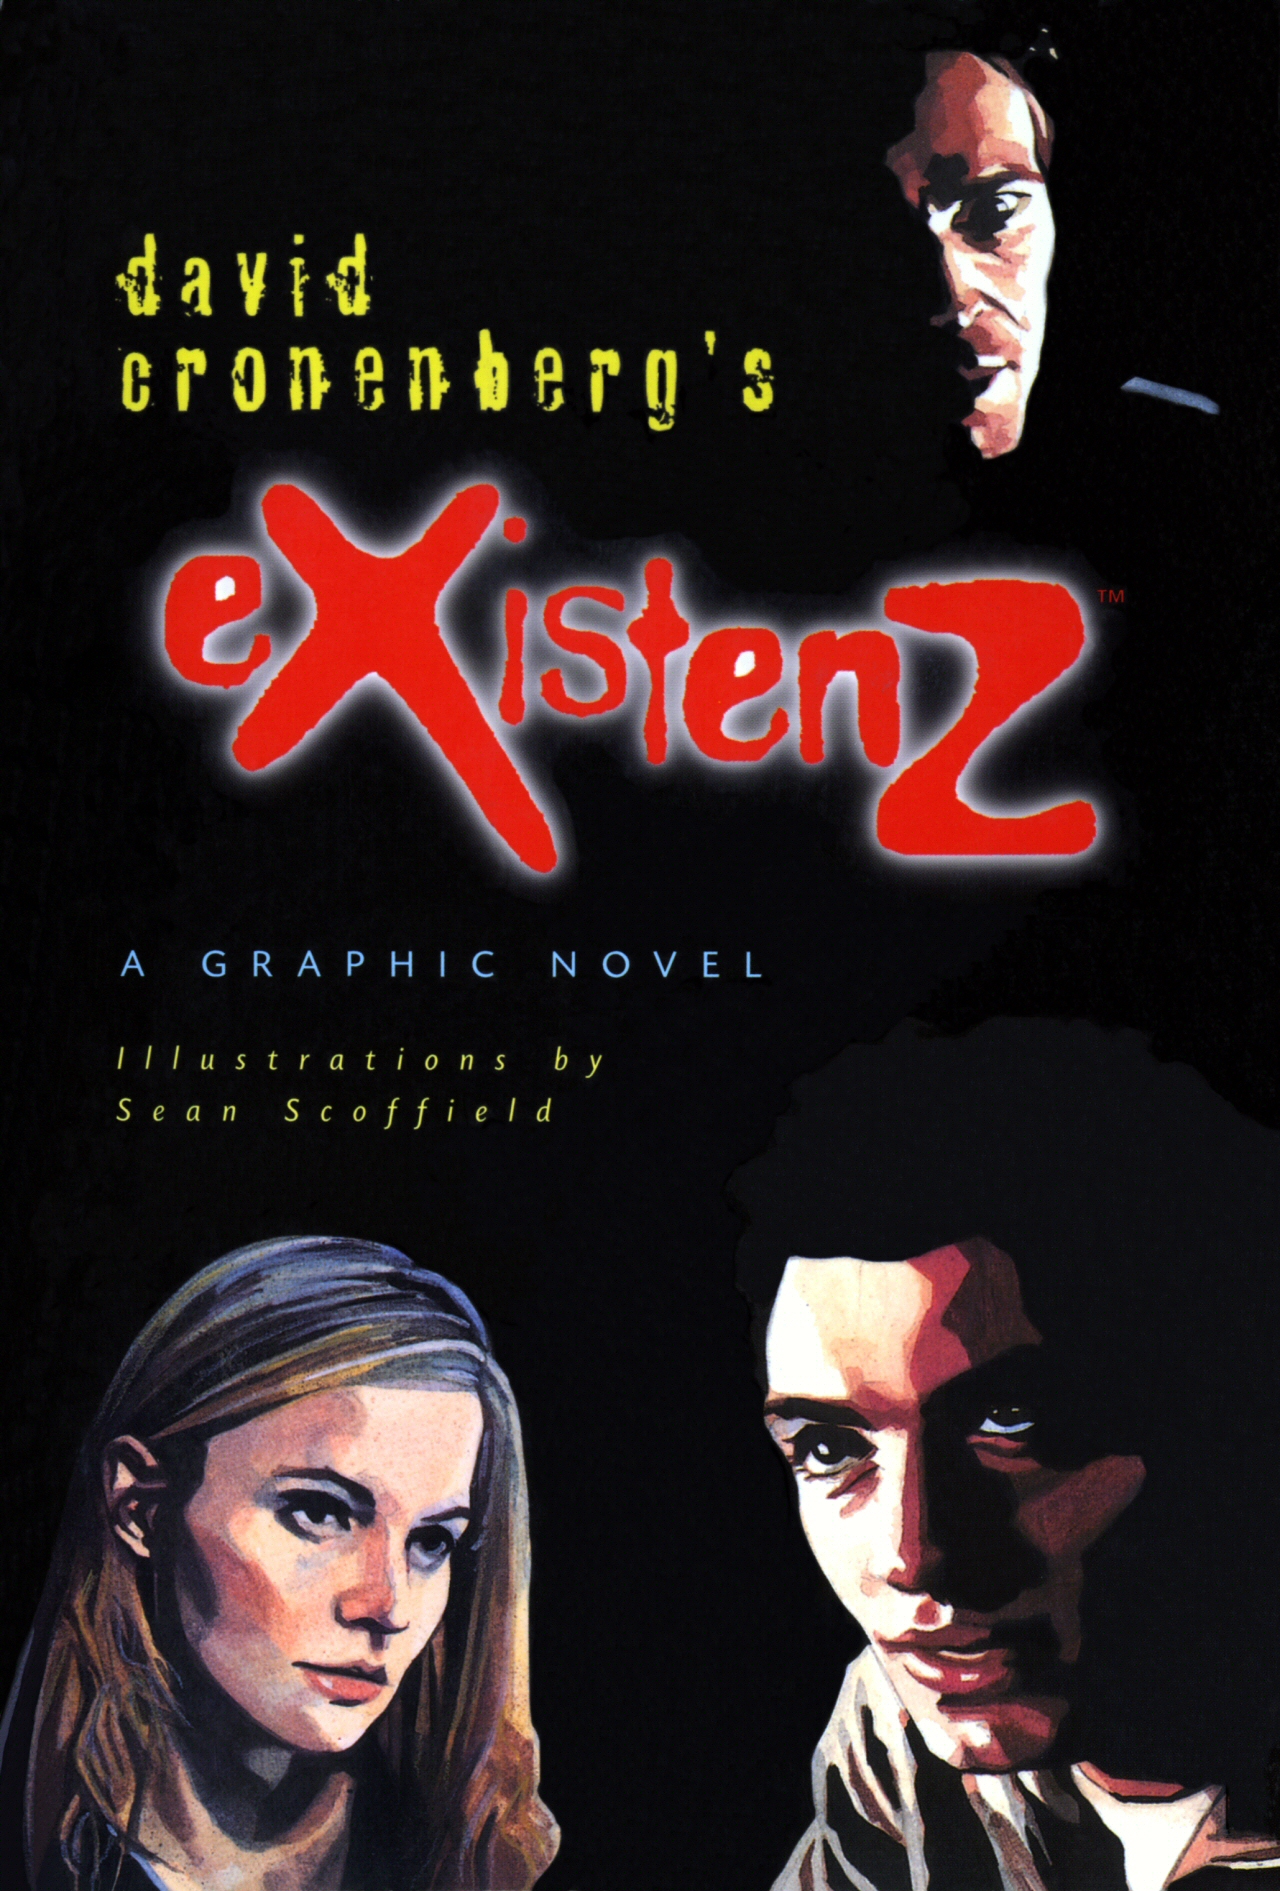 Read online eXistenZ comic -  Issue # TPB - 1